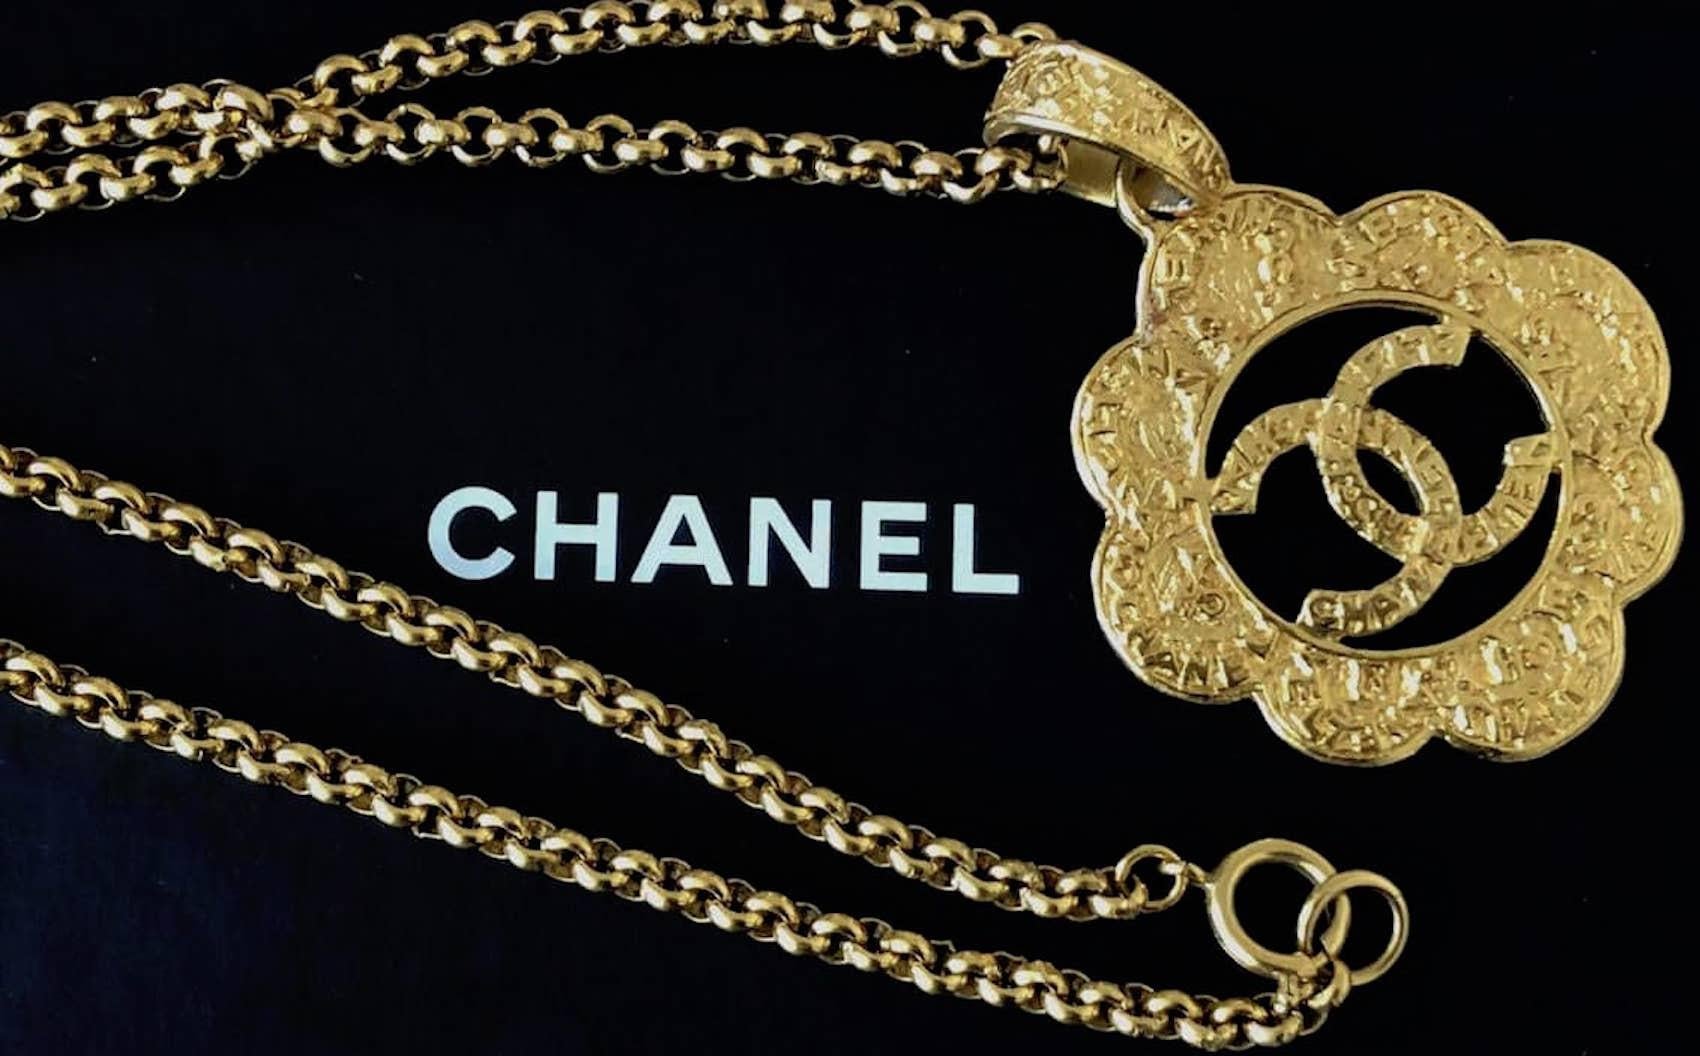 This wonderful rare, 1995 Chanel gold plated cutout CC logo hammered medallion flower chain necklace has the interlocking CC’s with CHANEL writing all around the medallion flower. It is from 1995 and it is hallmarked Chanel with the year behind and